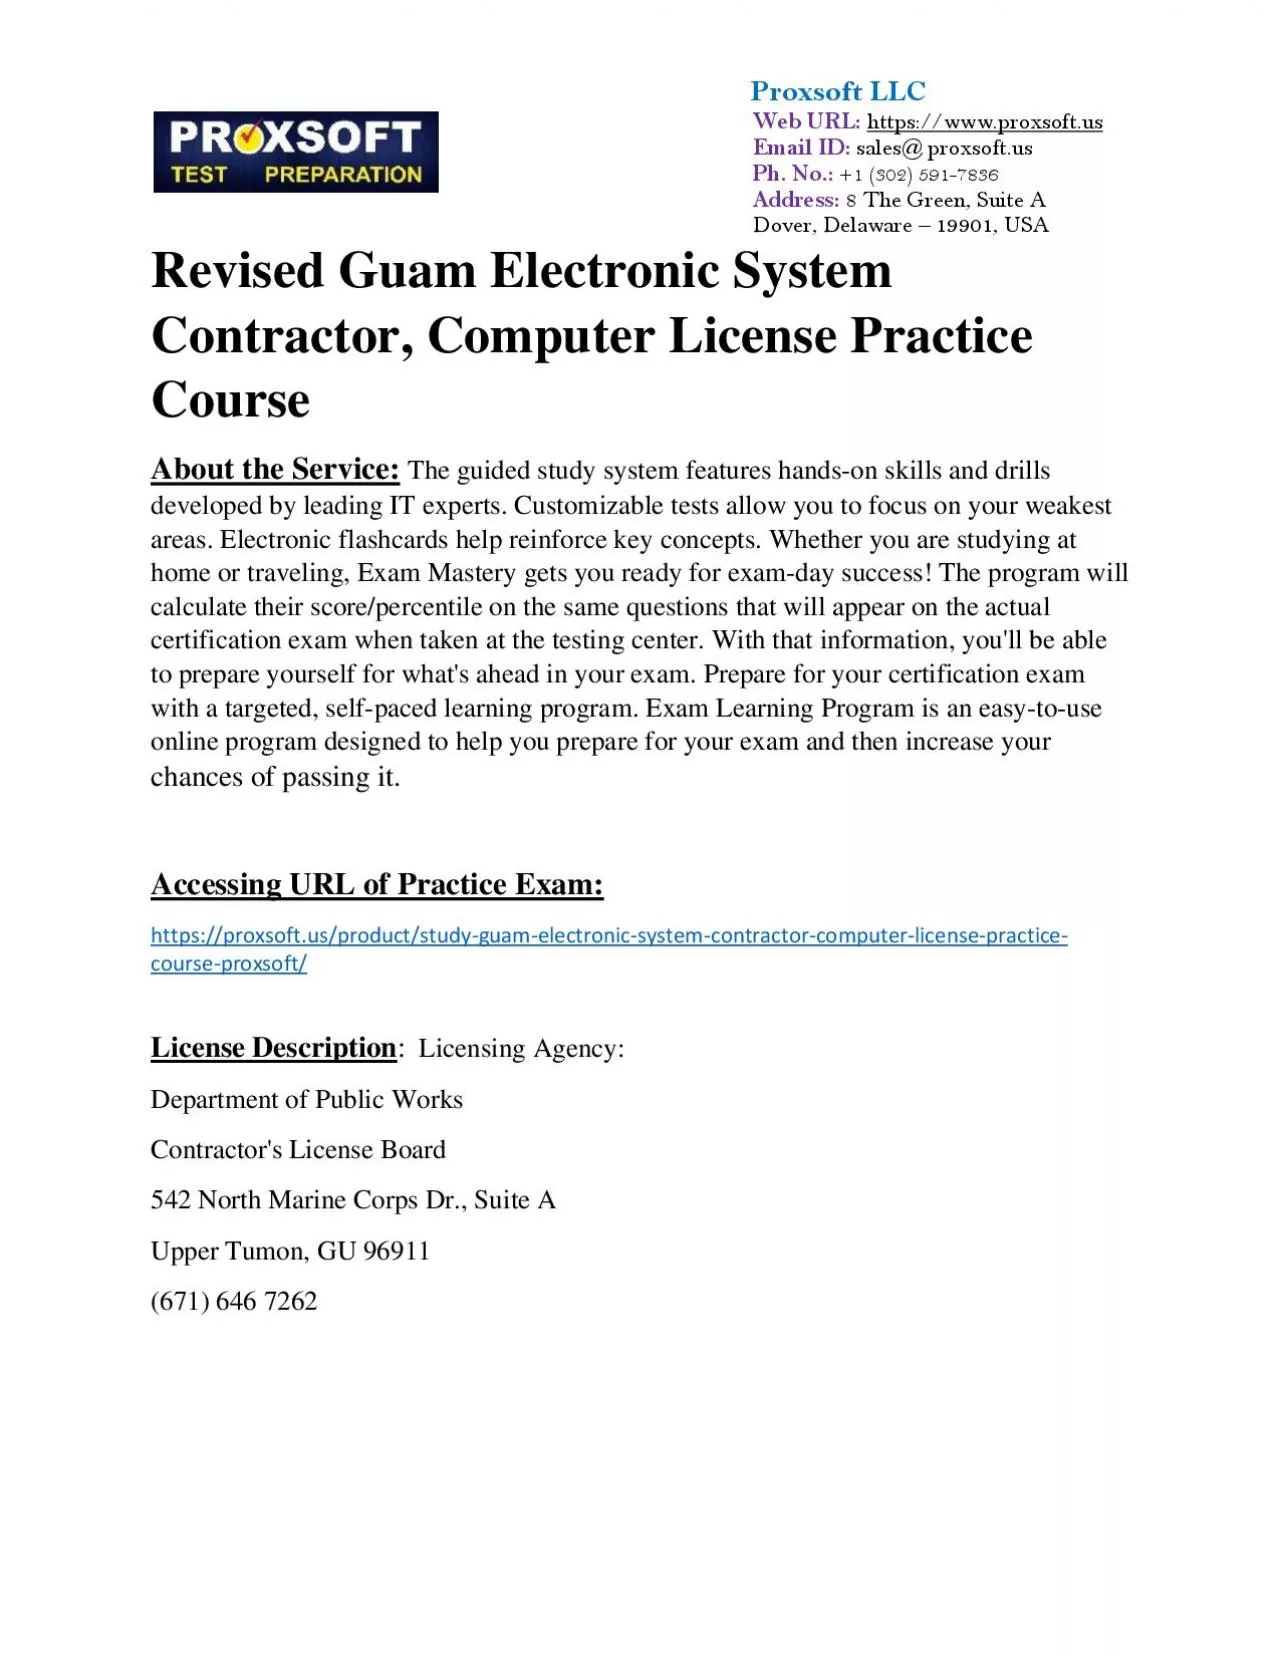 Revised Guam Electronic System Contractor, Computer License Practice Course